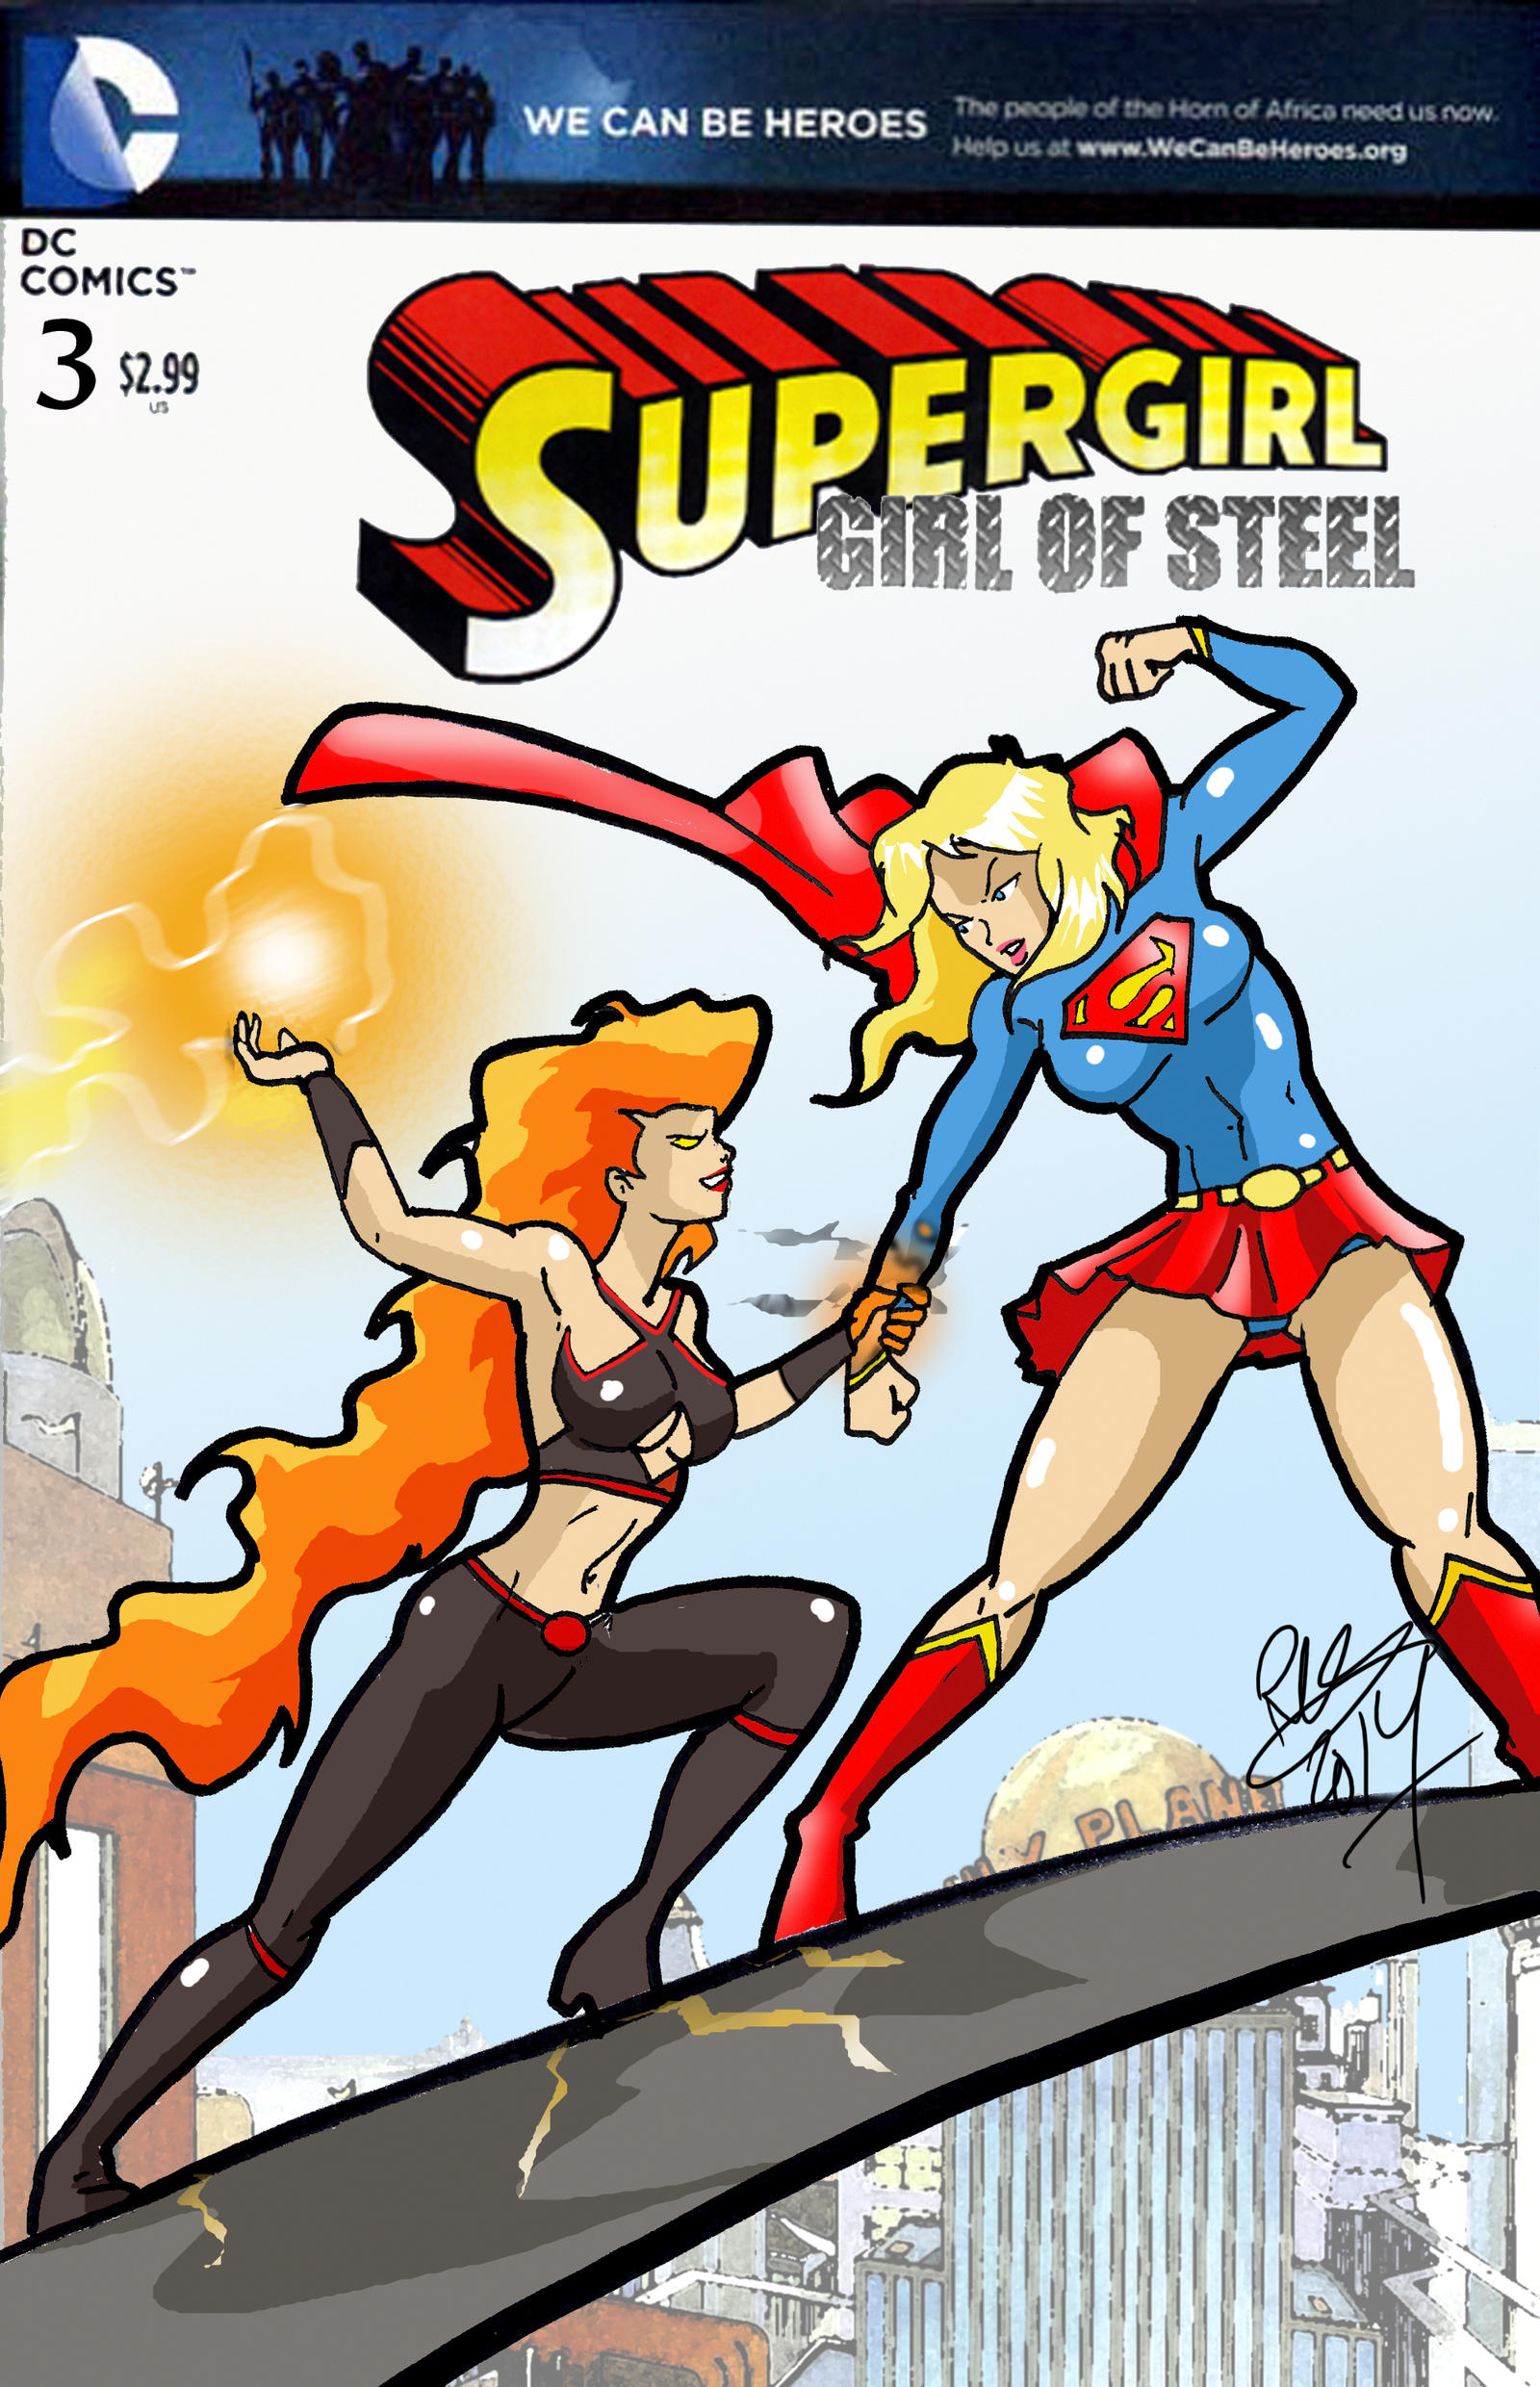 Supergirl: Girl of Steel Issue 3 Cover